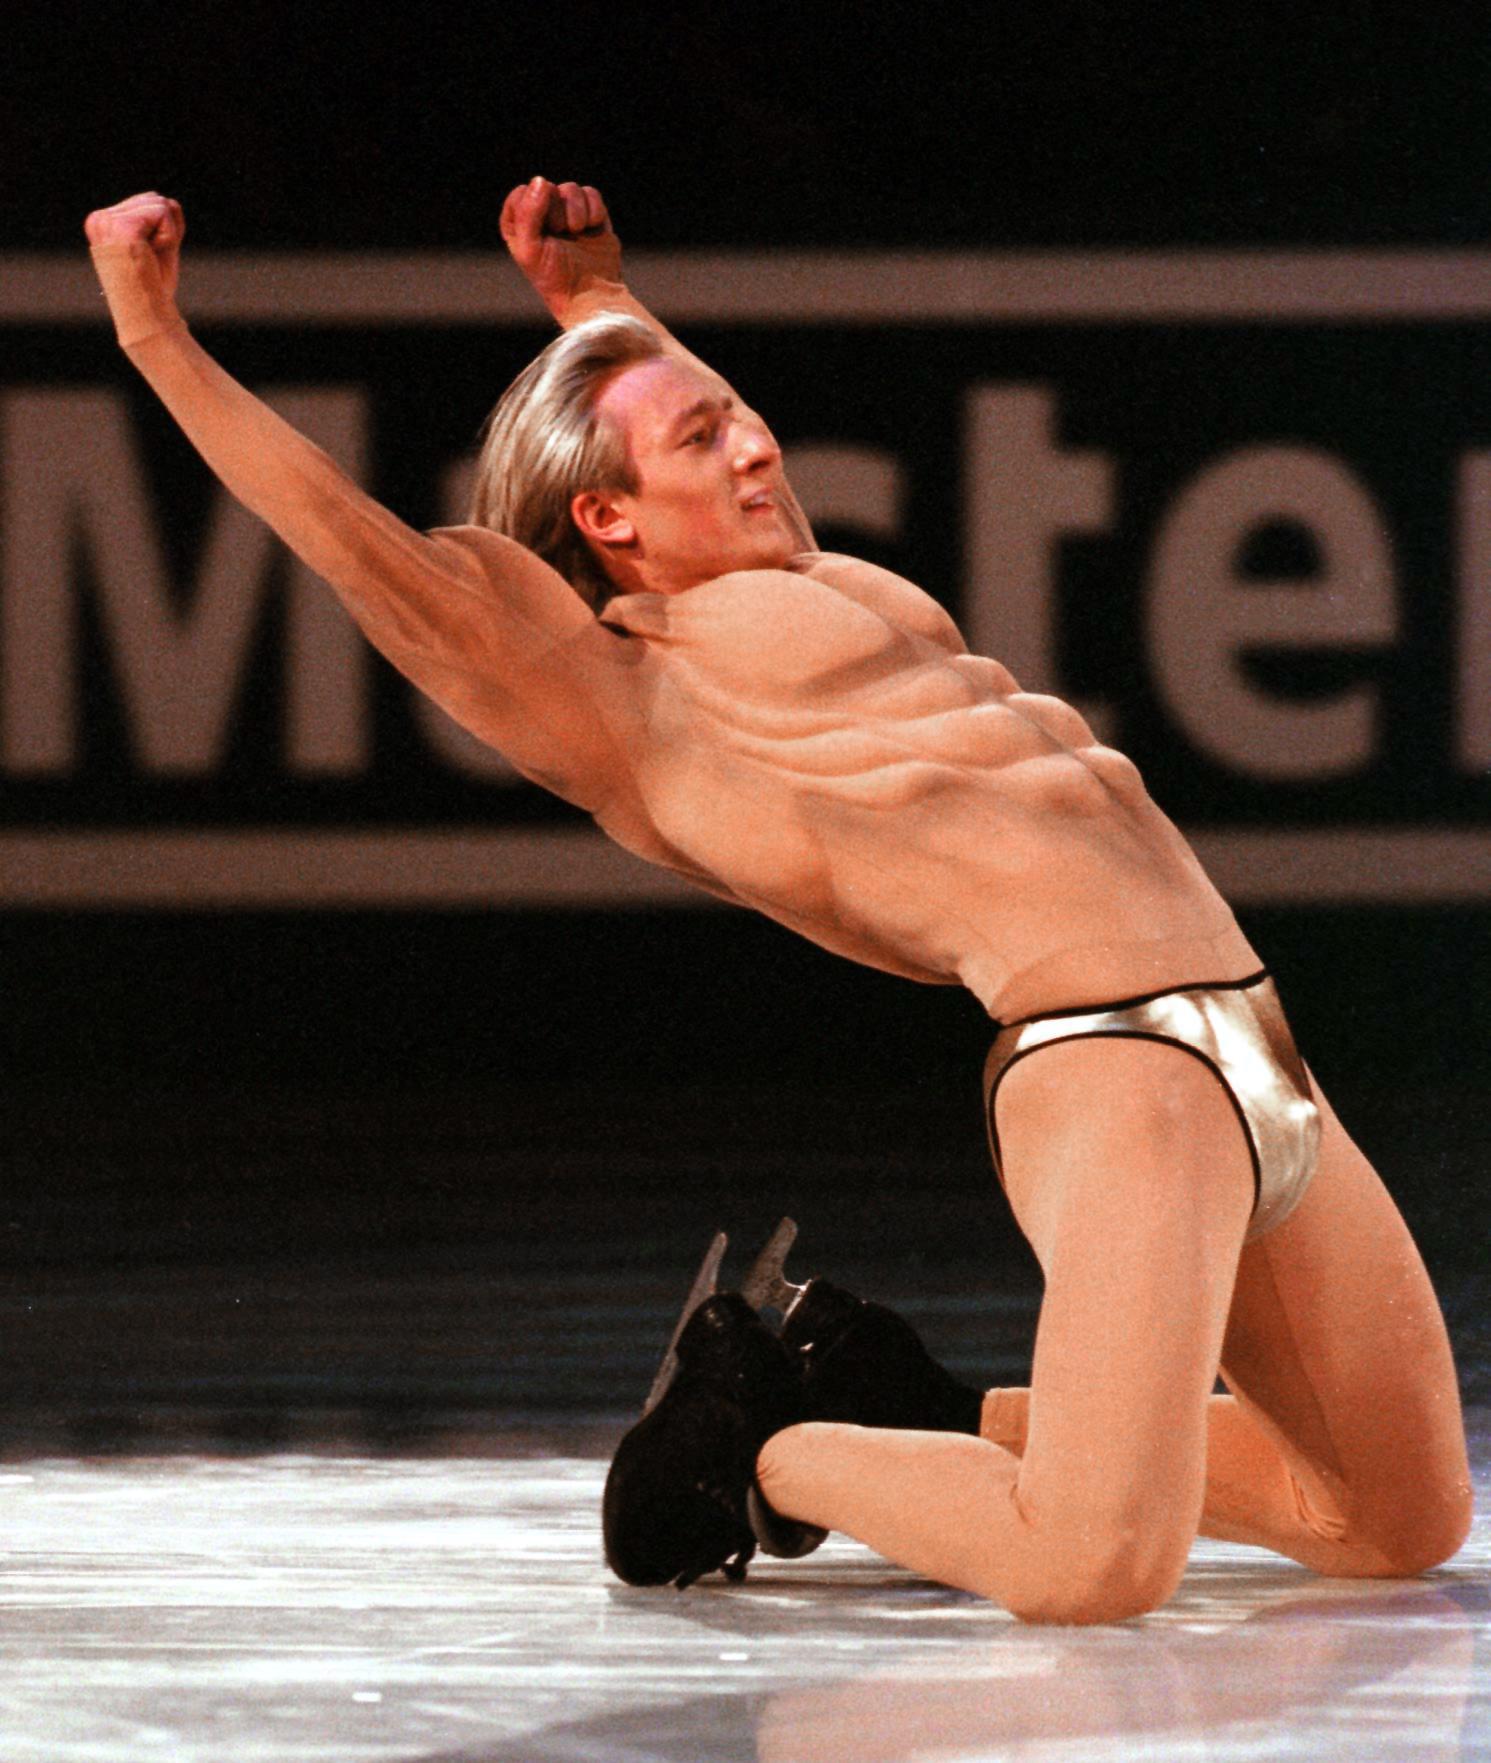 Naked male ice skaters ❤️ Best adult photos at gayporn.id